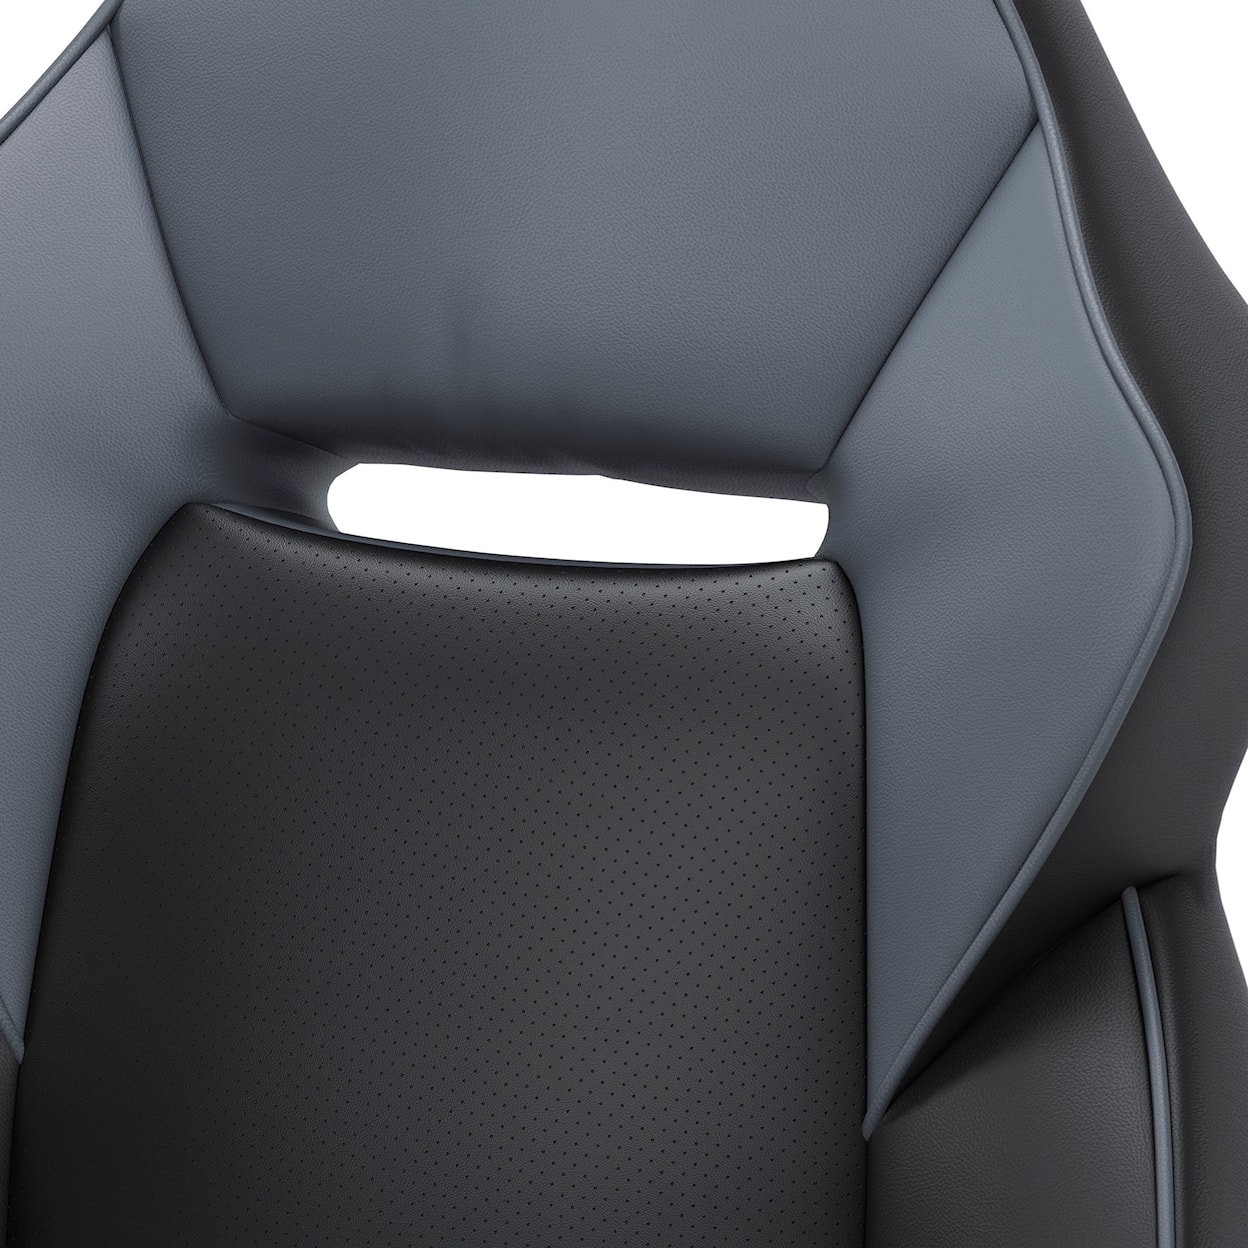 Signature Design by Ashley Lynxtyn Home Office Chair